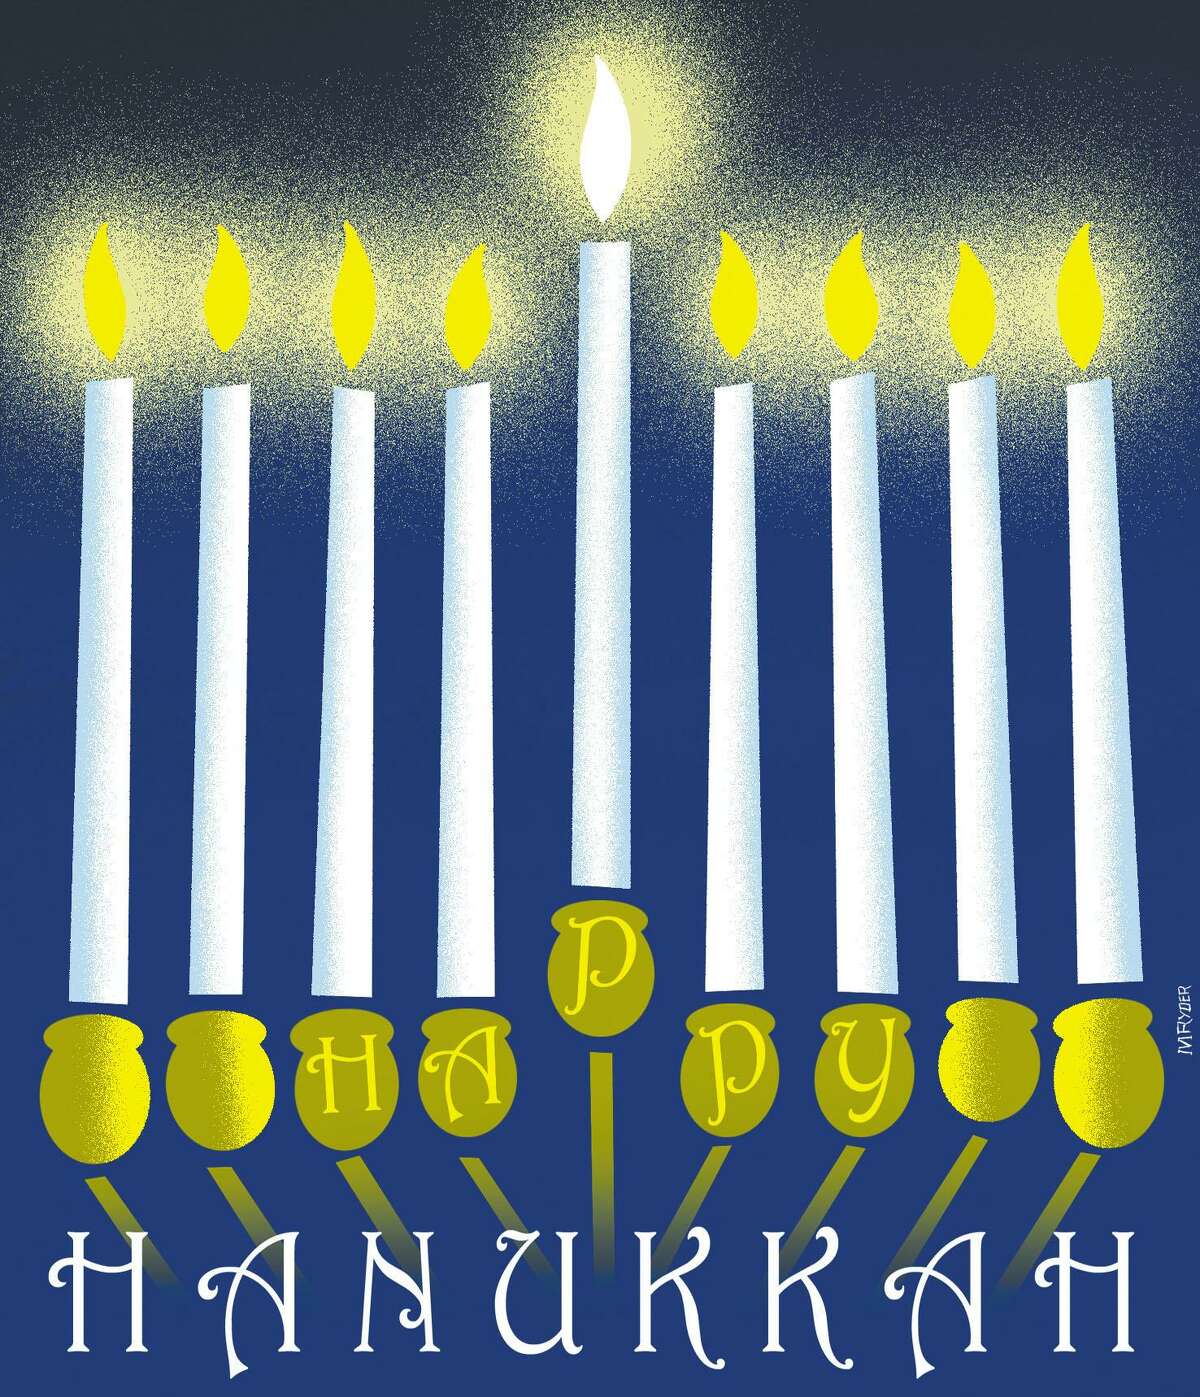 This artwork by M. Ryder relates to Hanukkah.